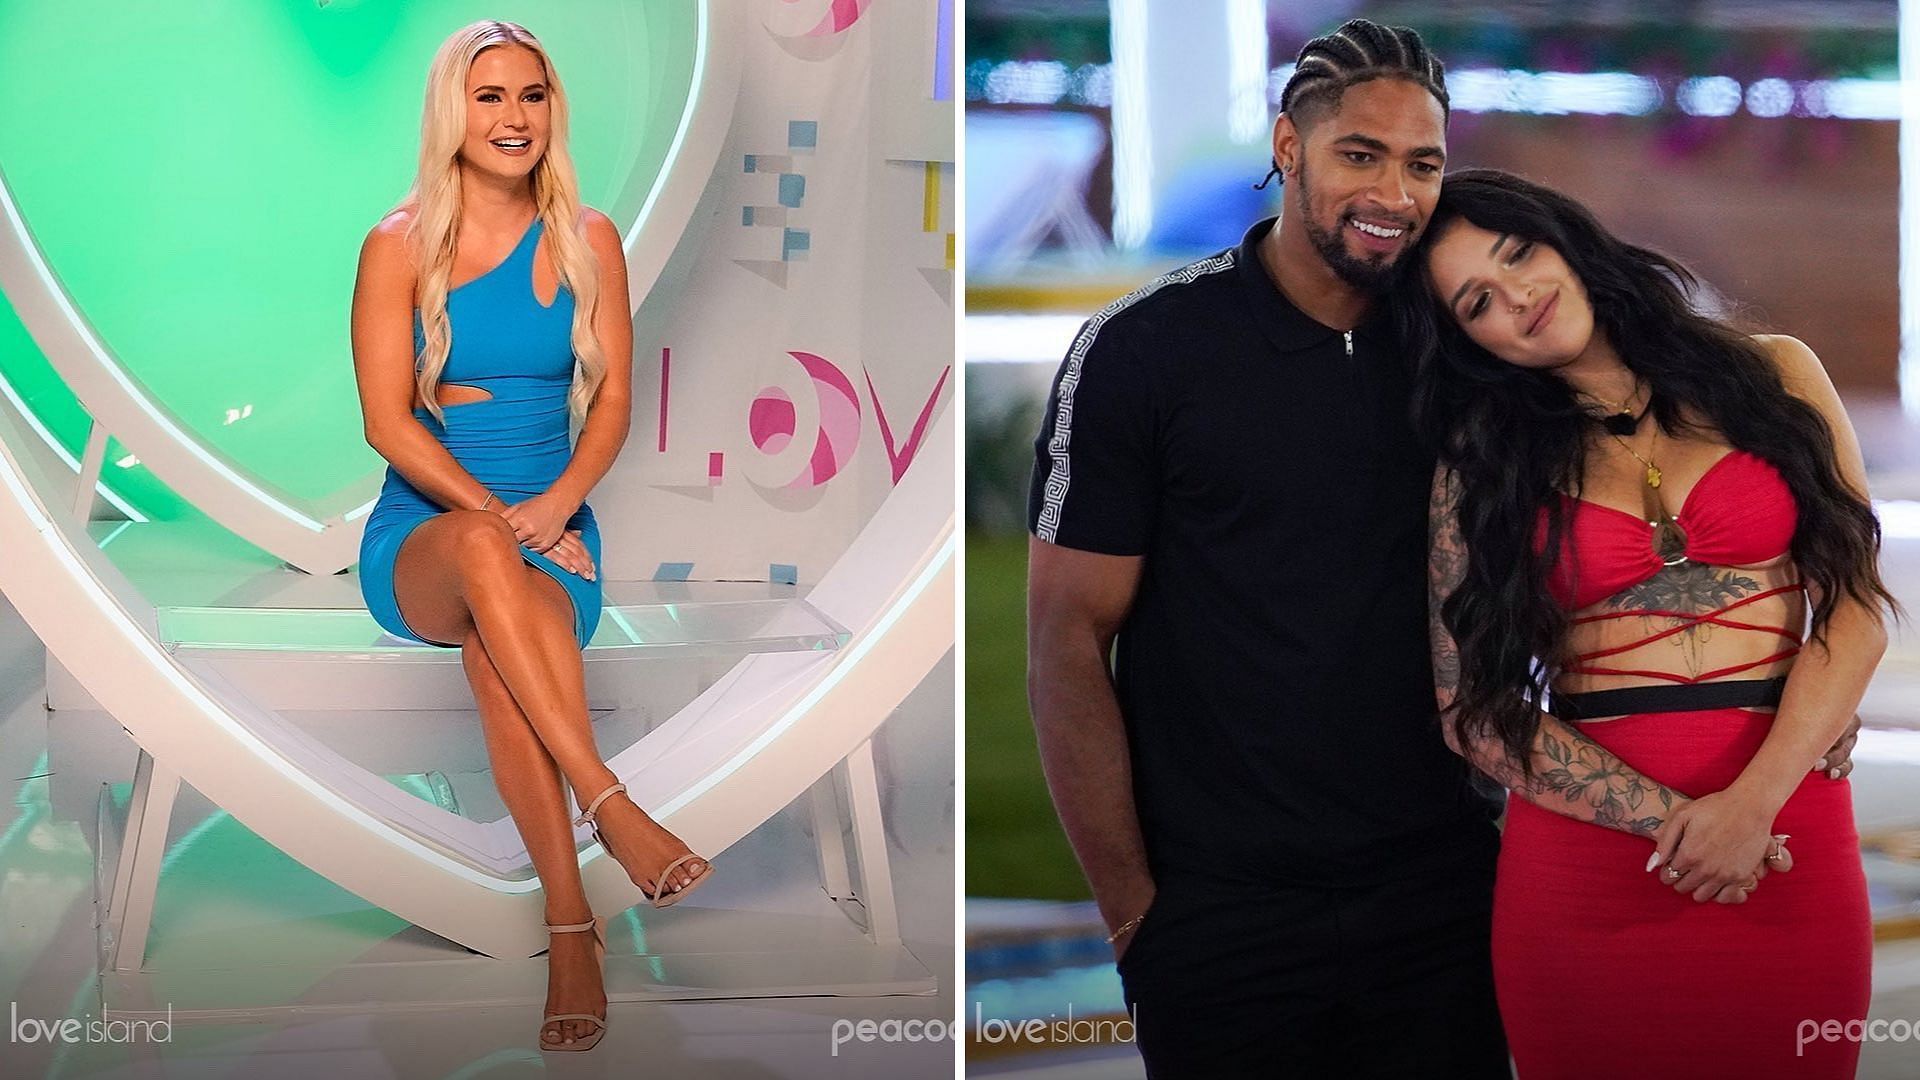 Fans criticize Love Island USA contestant Jesse for two-timing with Valerie and Deb (Image via loveislandusa/Instagram)